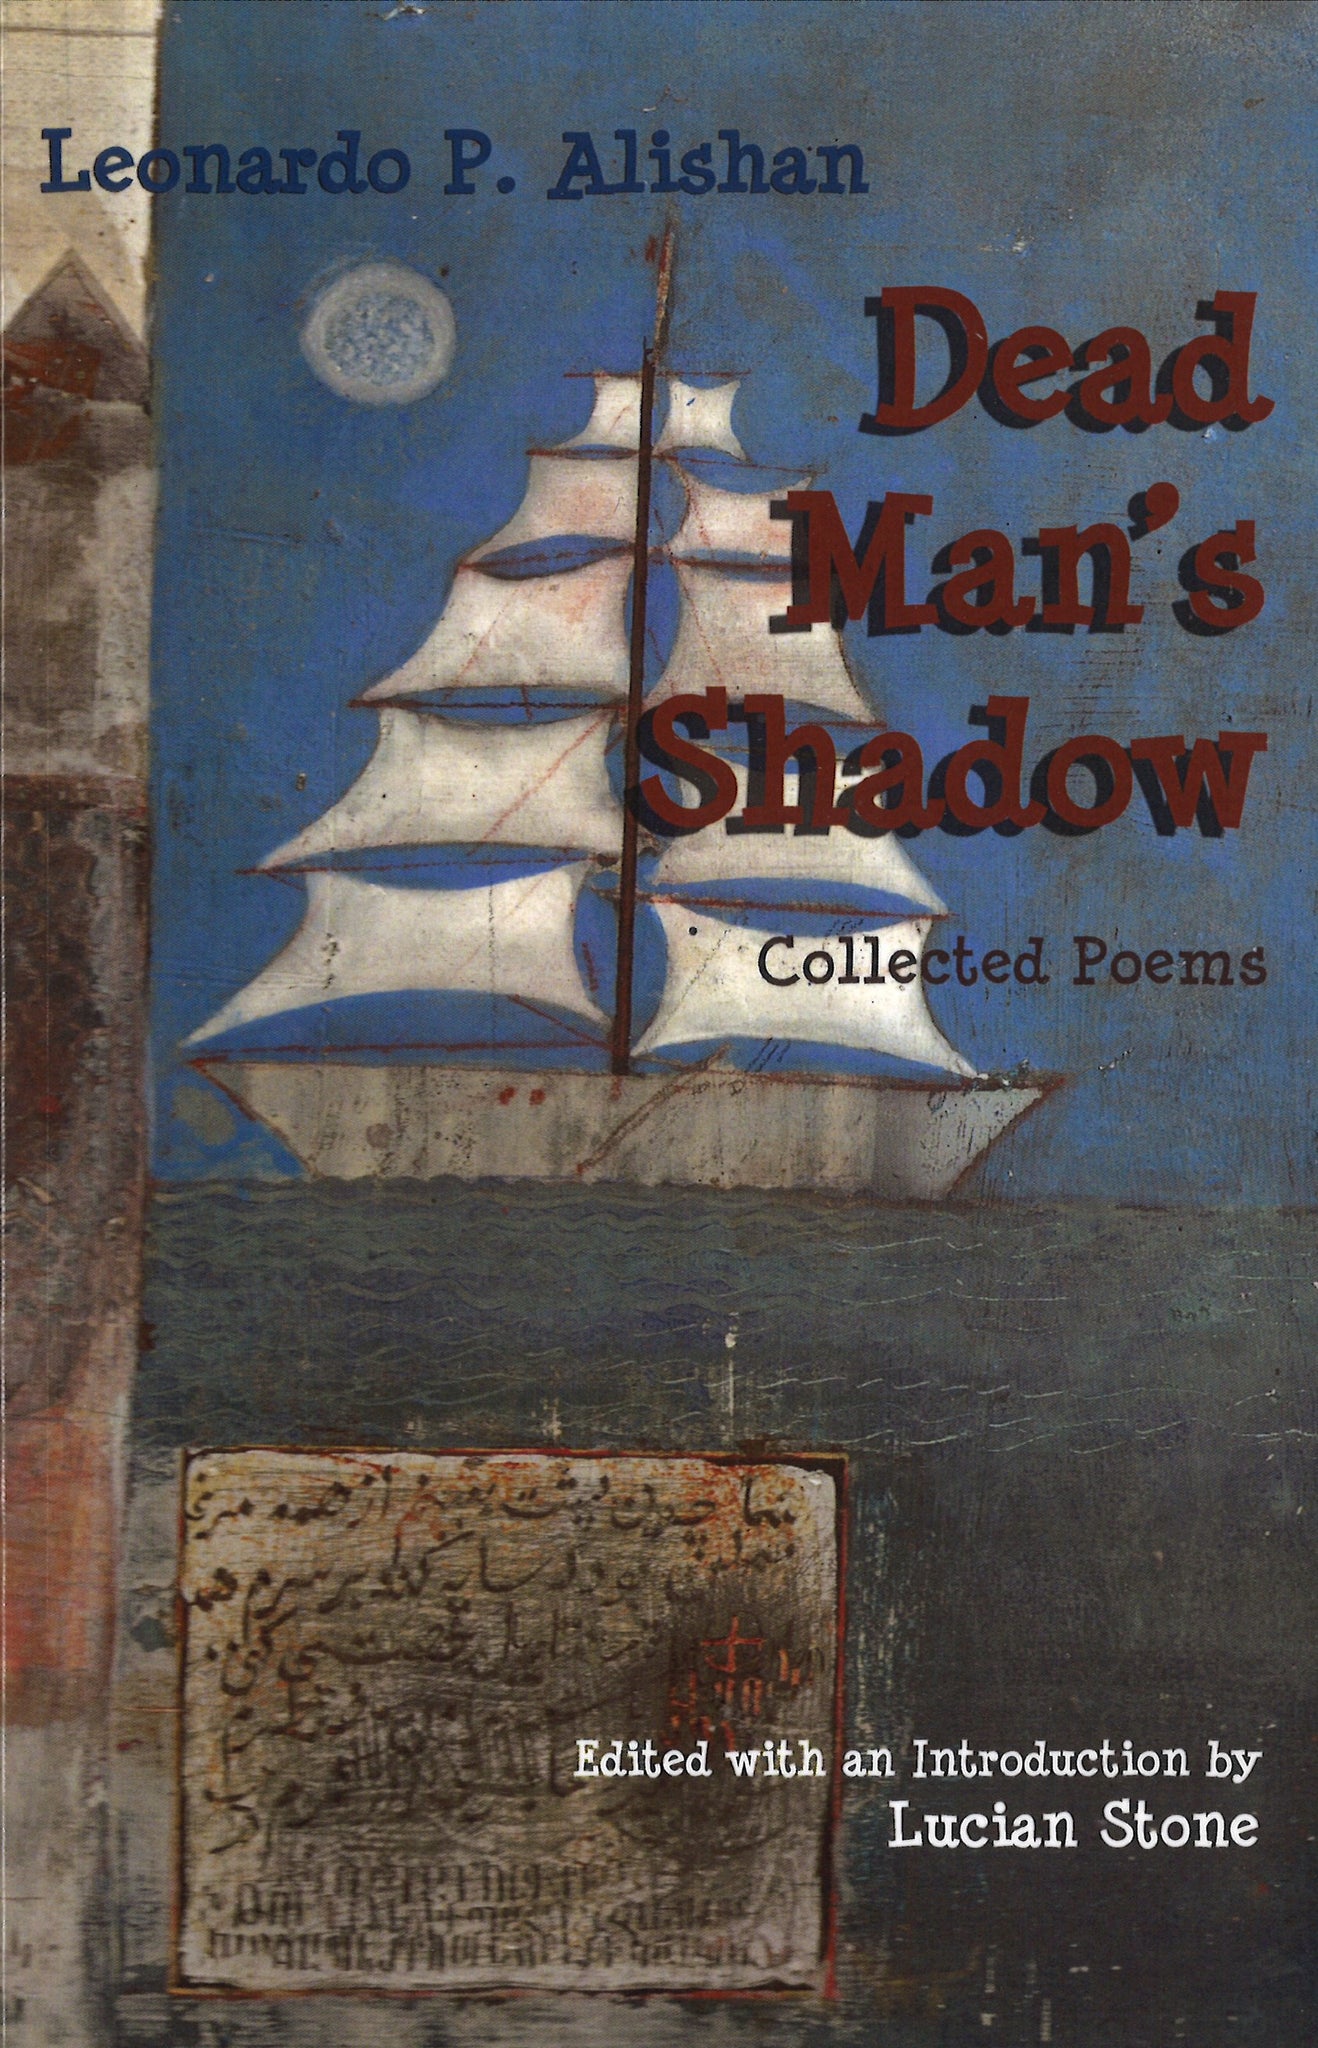 DEAD MAN'S SHADOW: COLLECTED POEMS